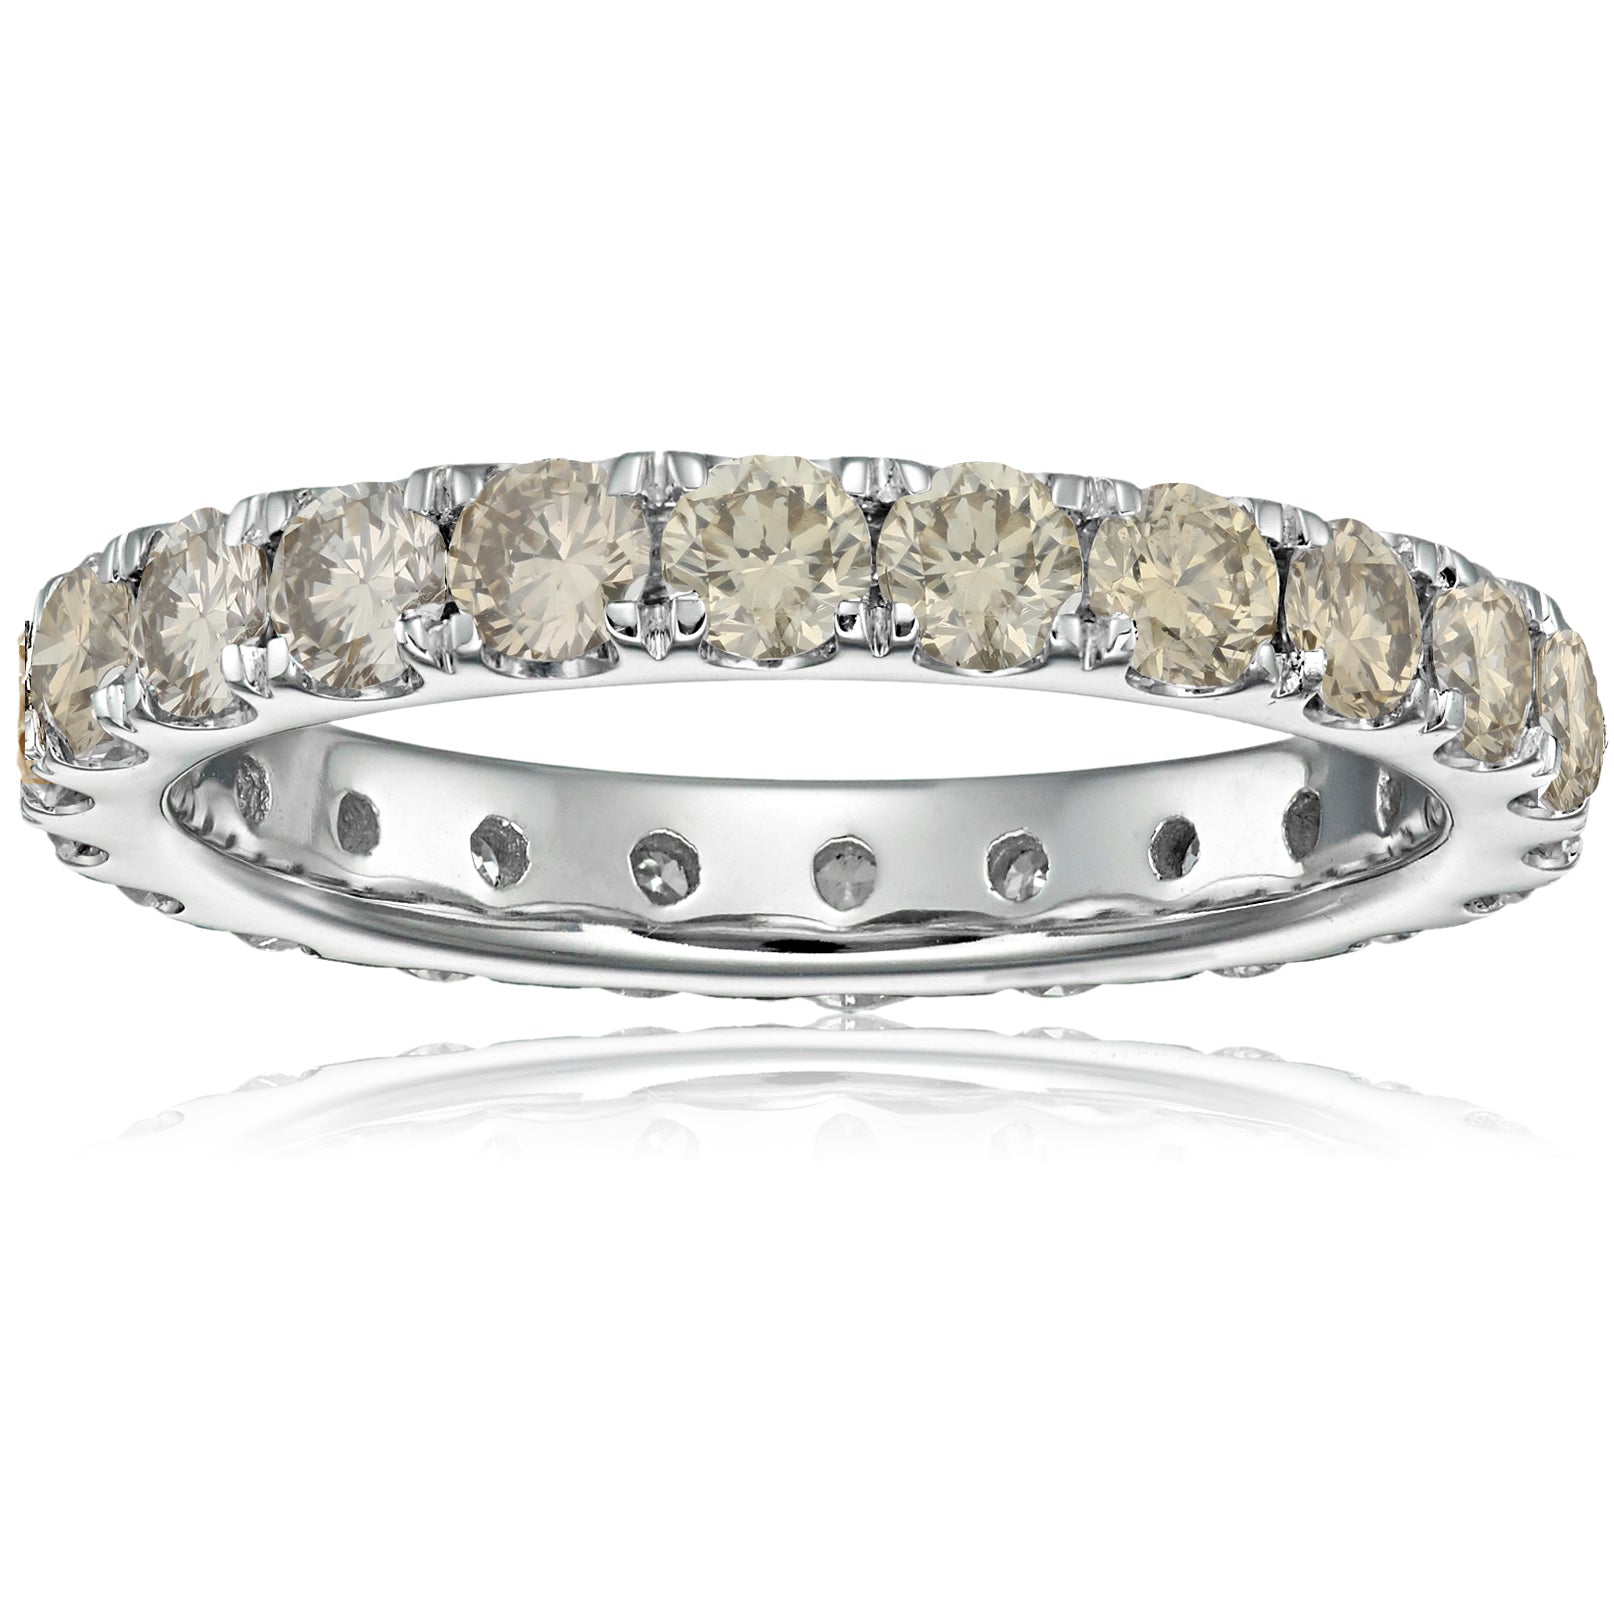 3 cttw Champagne Diamond Eternity Ring for Women, Wedding Band in 14K White Gold, Size 6-9